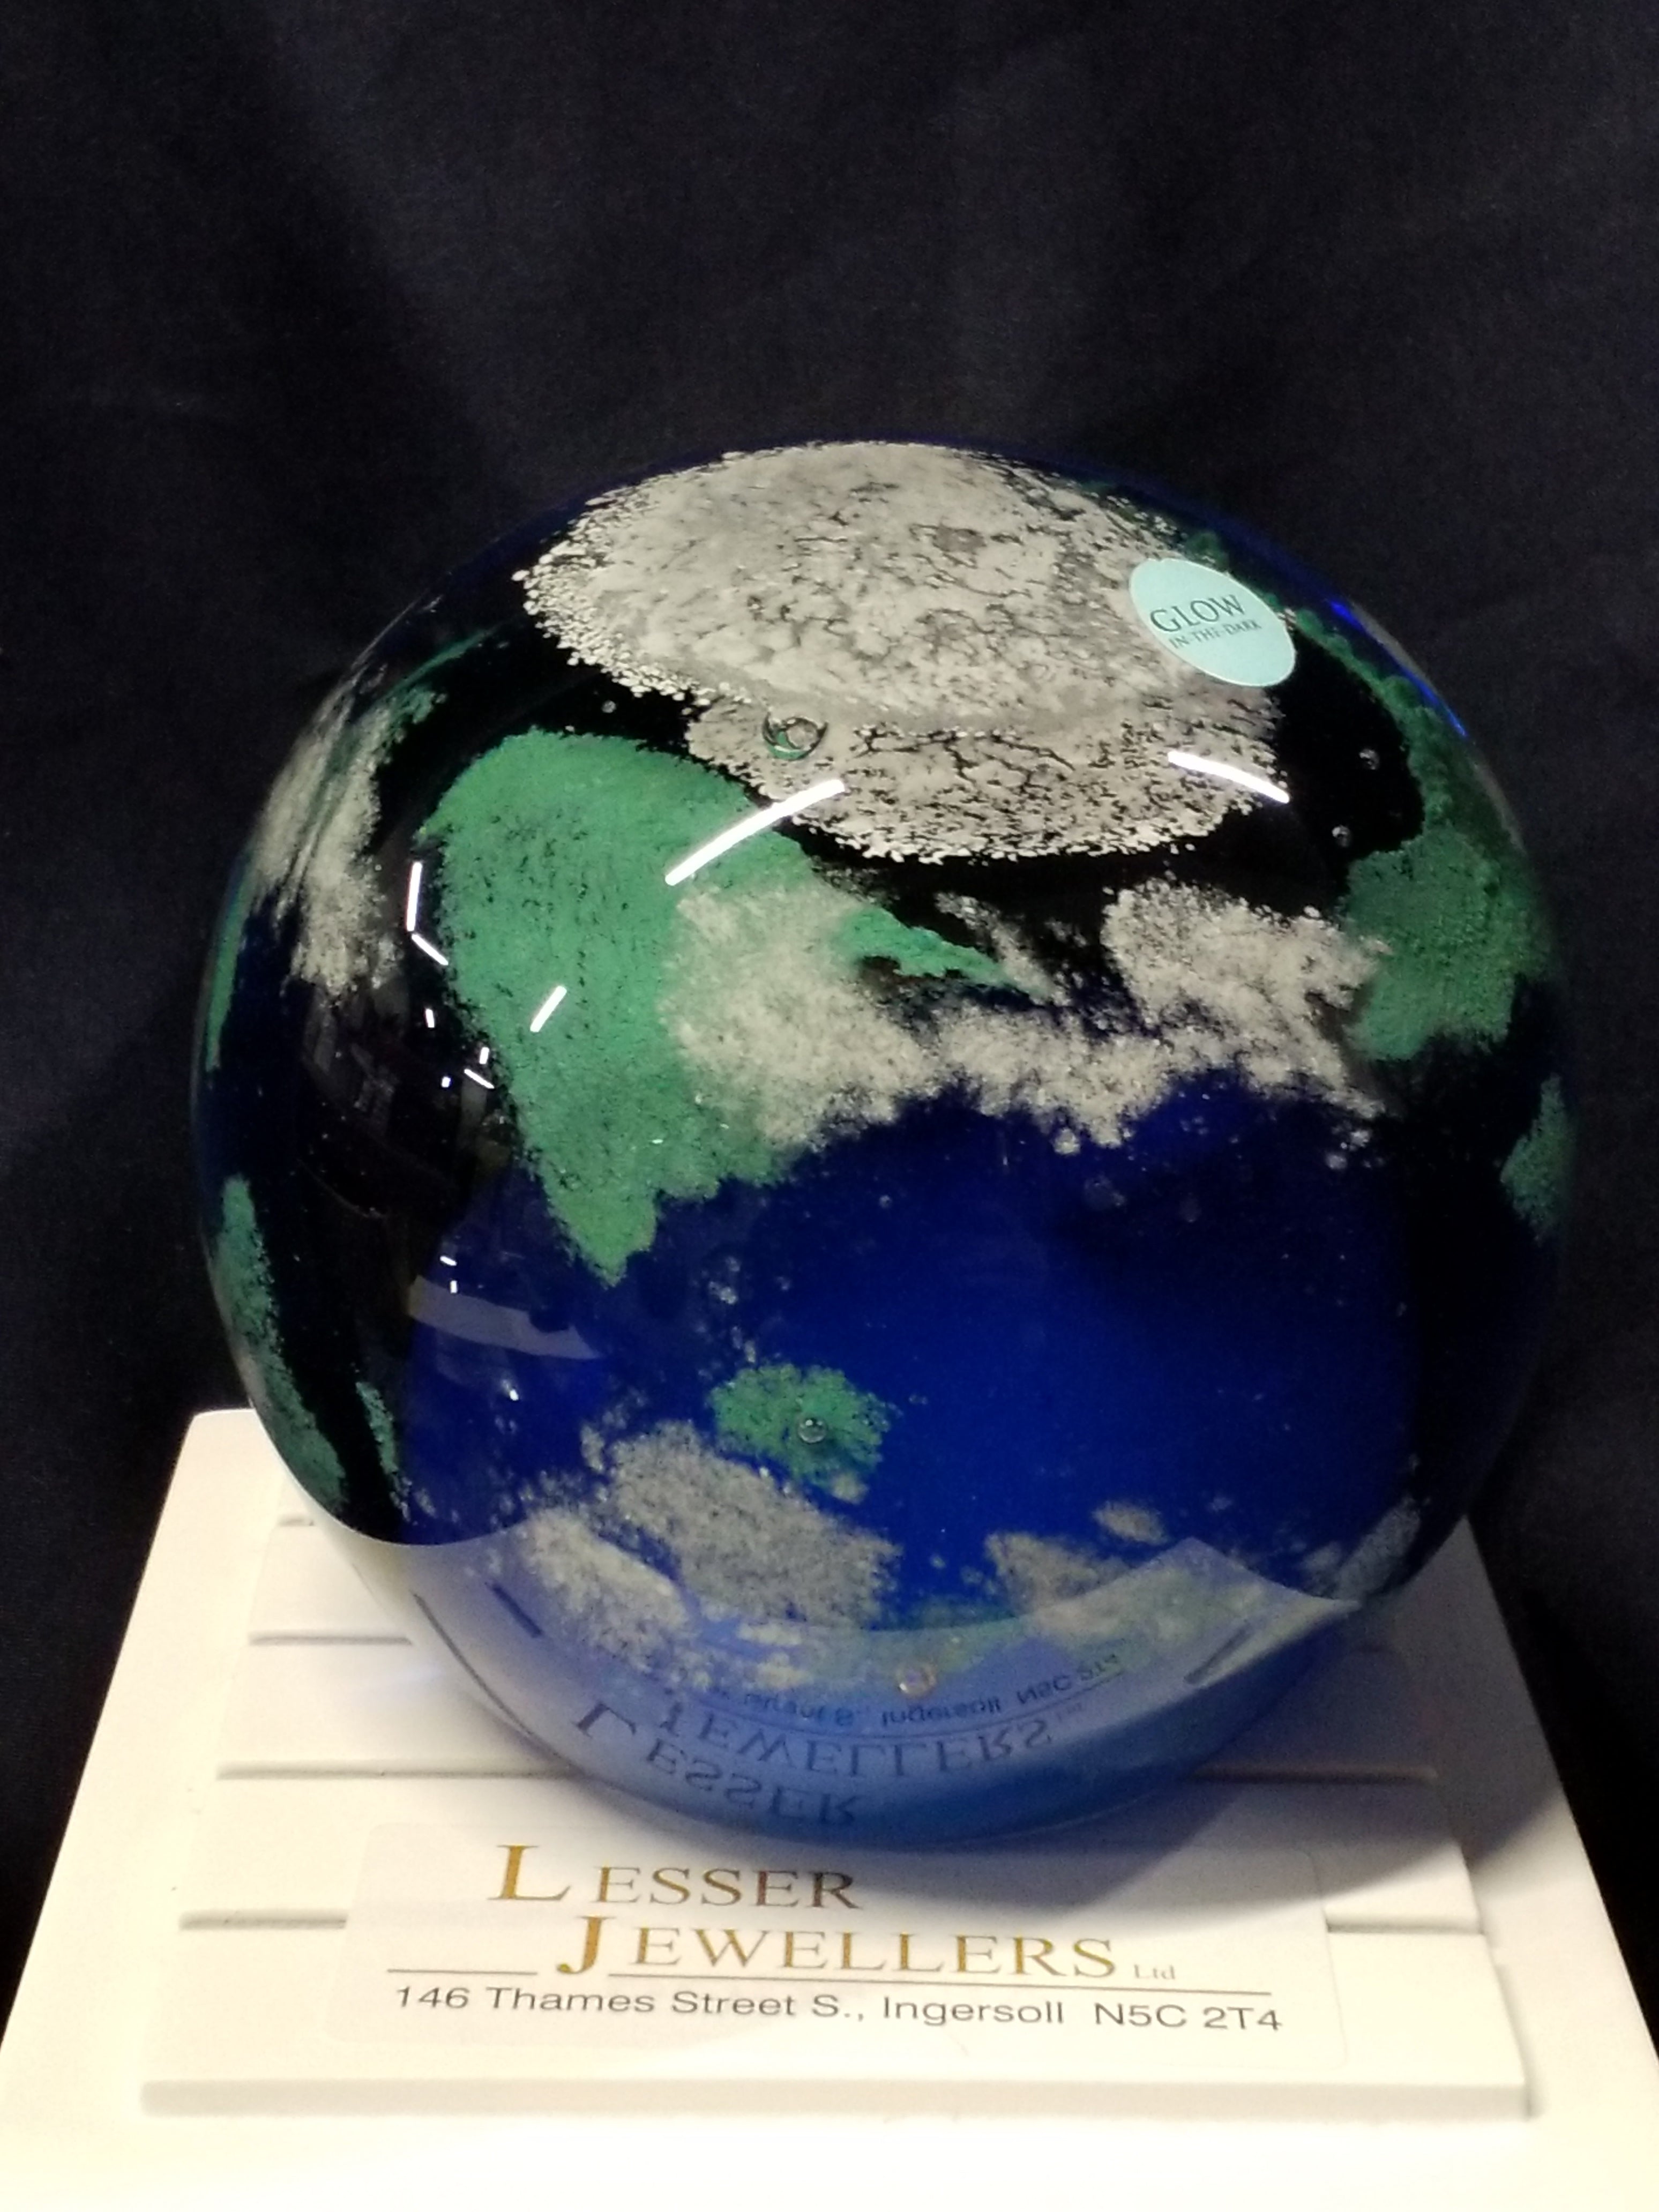 Glass Paperweight - Clouds over Stylized Earth